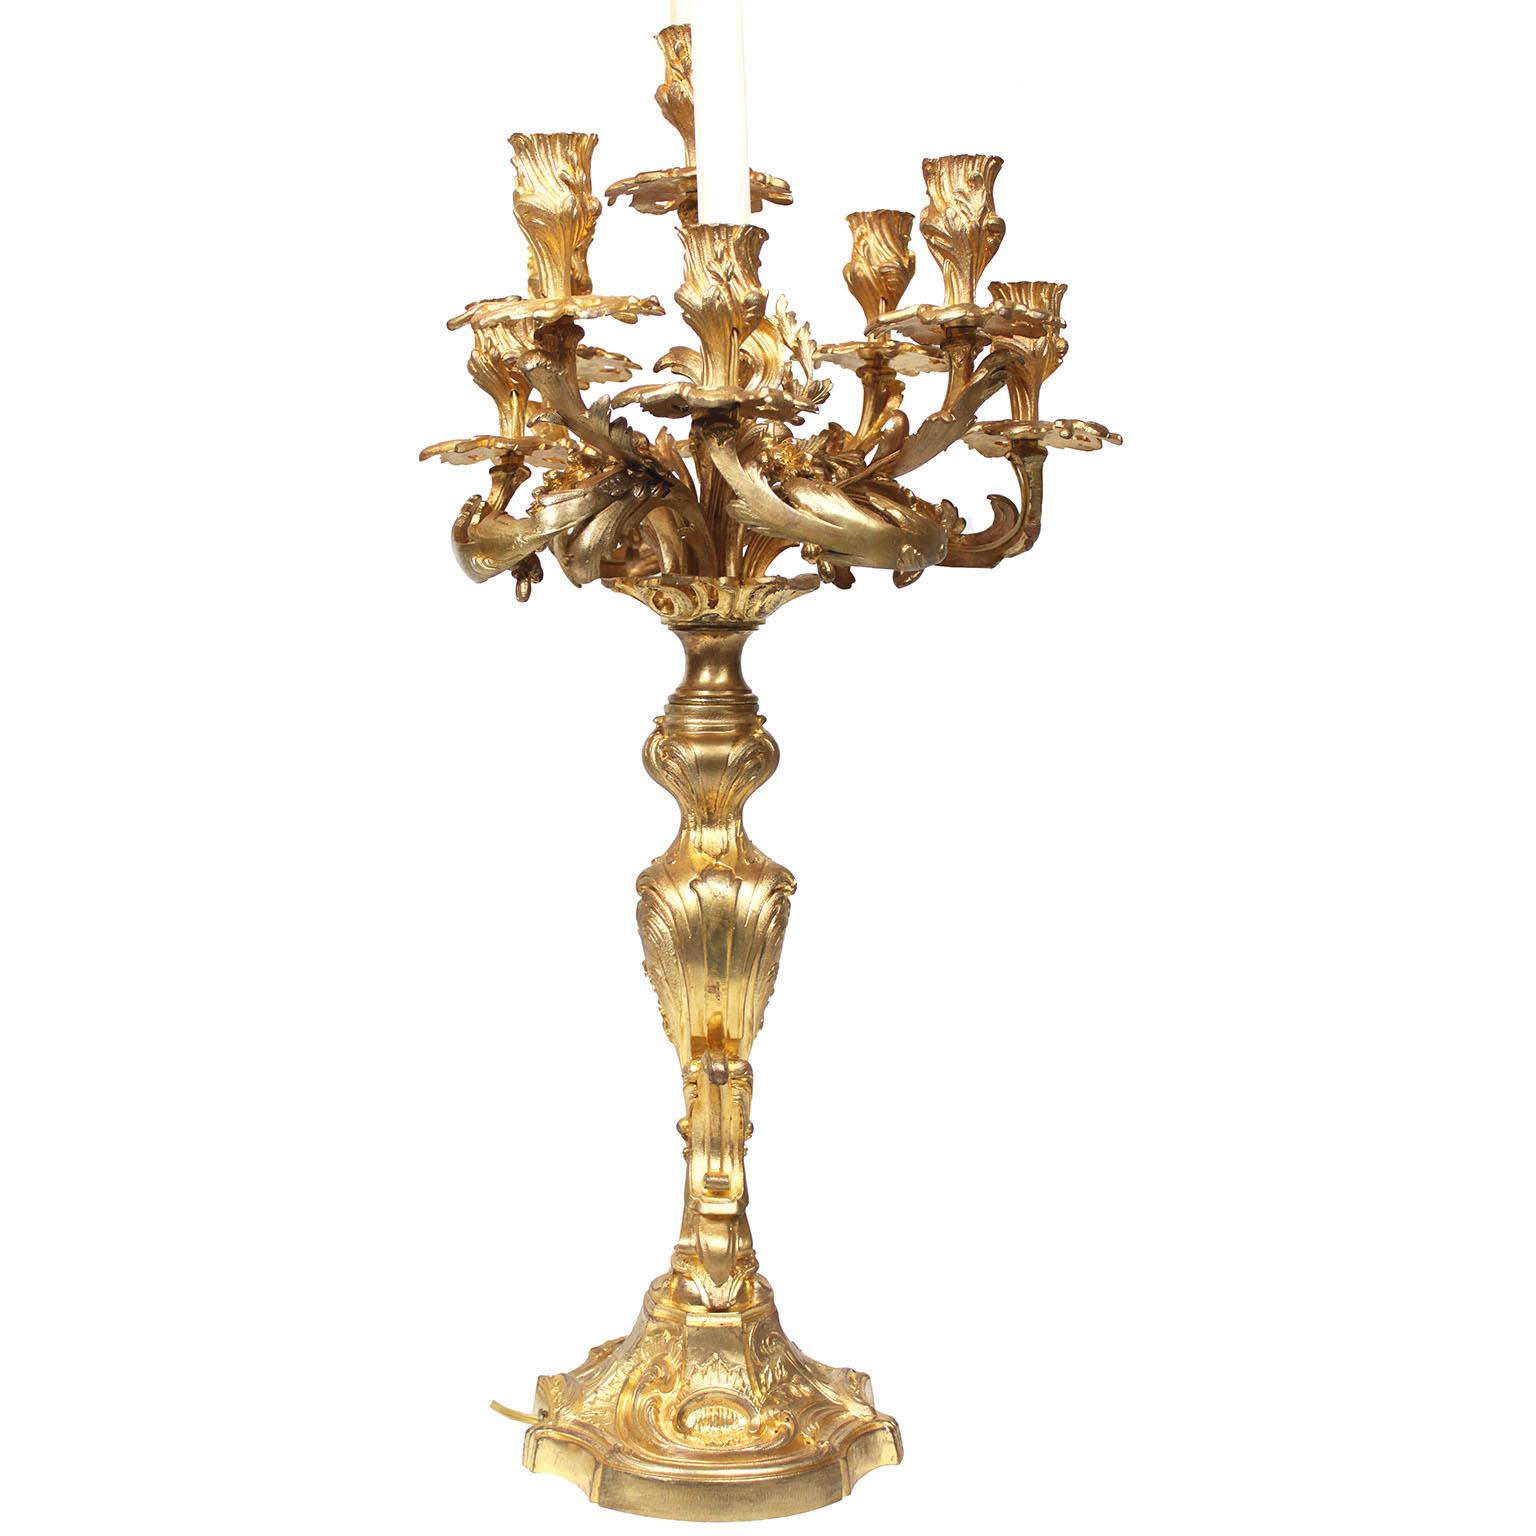 A Pair of French 19th Century Louis XV Style Gilt-Bronze Nine-Light Candelabra For Sale 3